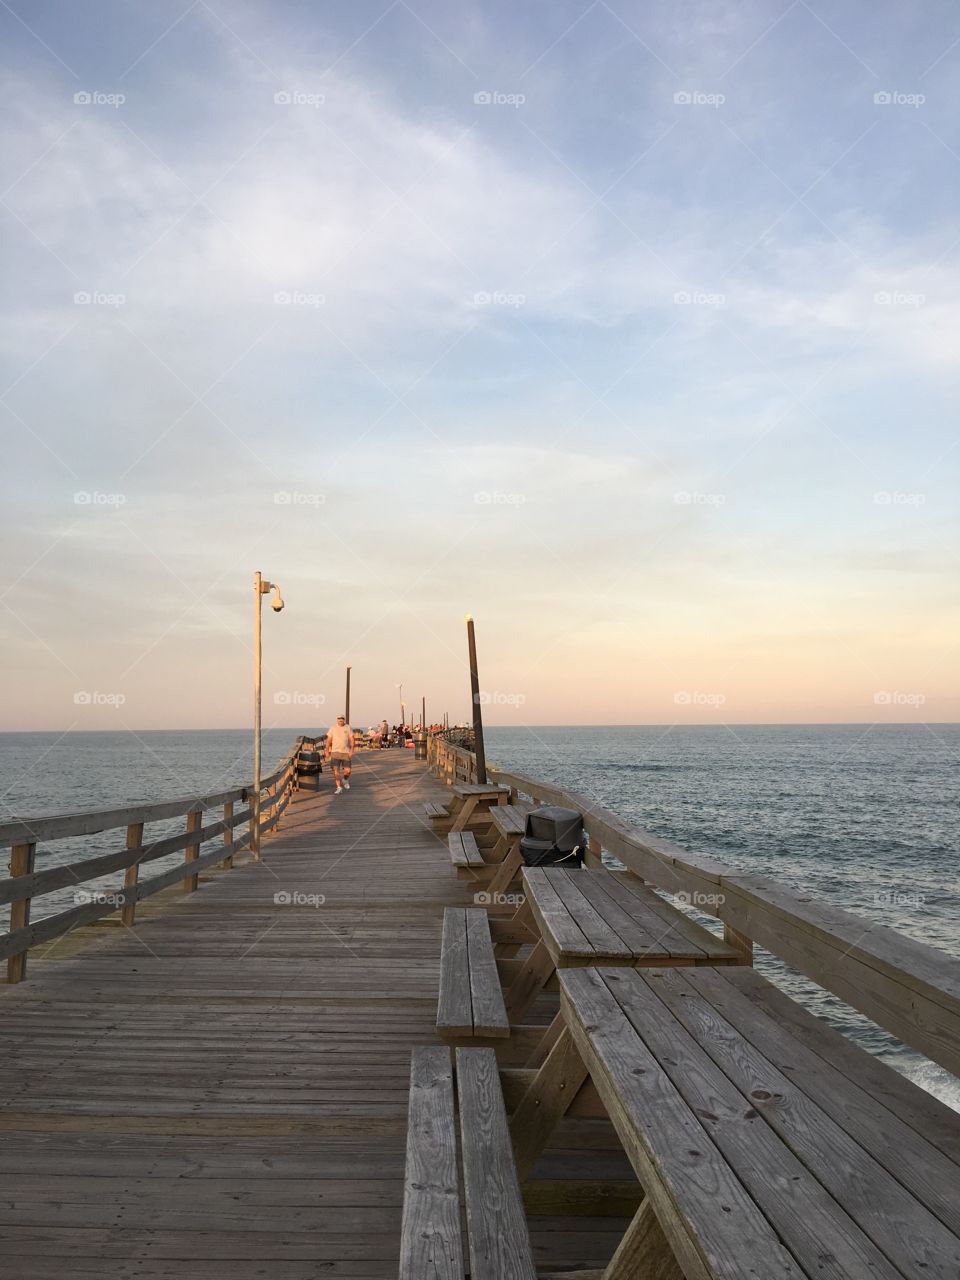 Early evening view of fishing pier Outer Banks, NC